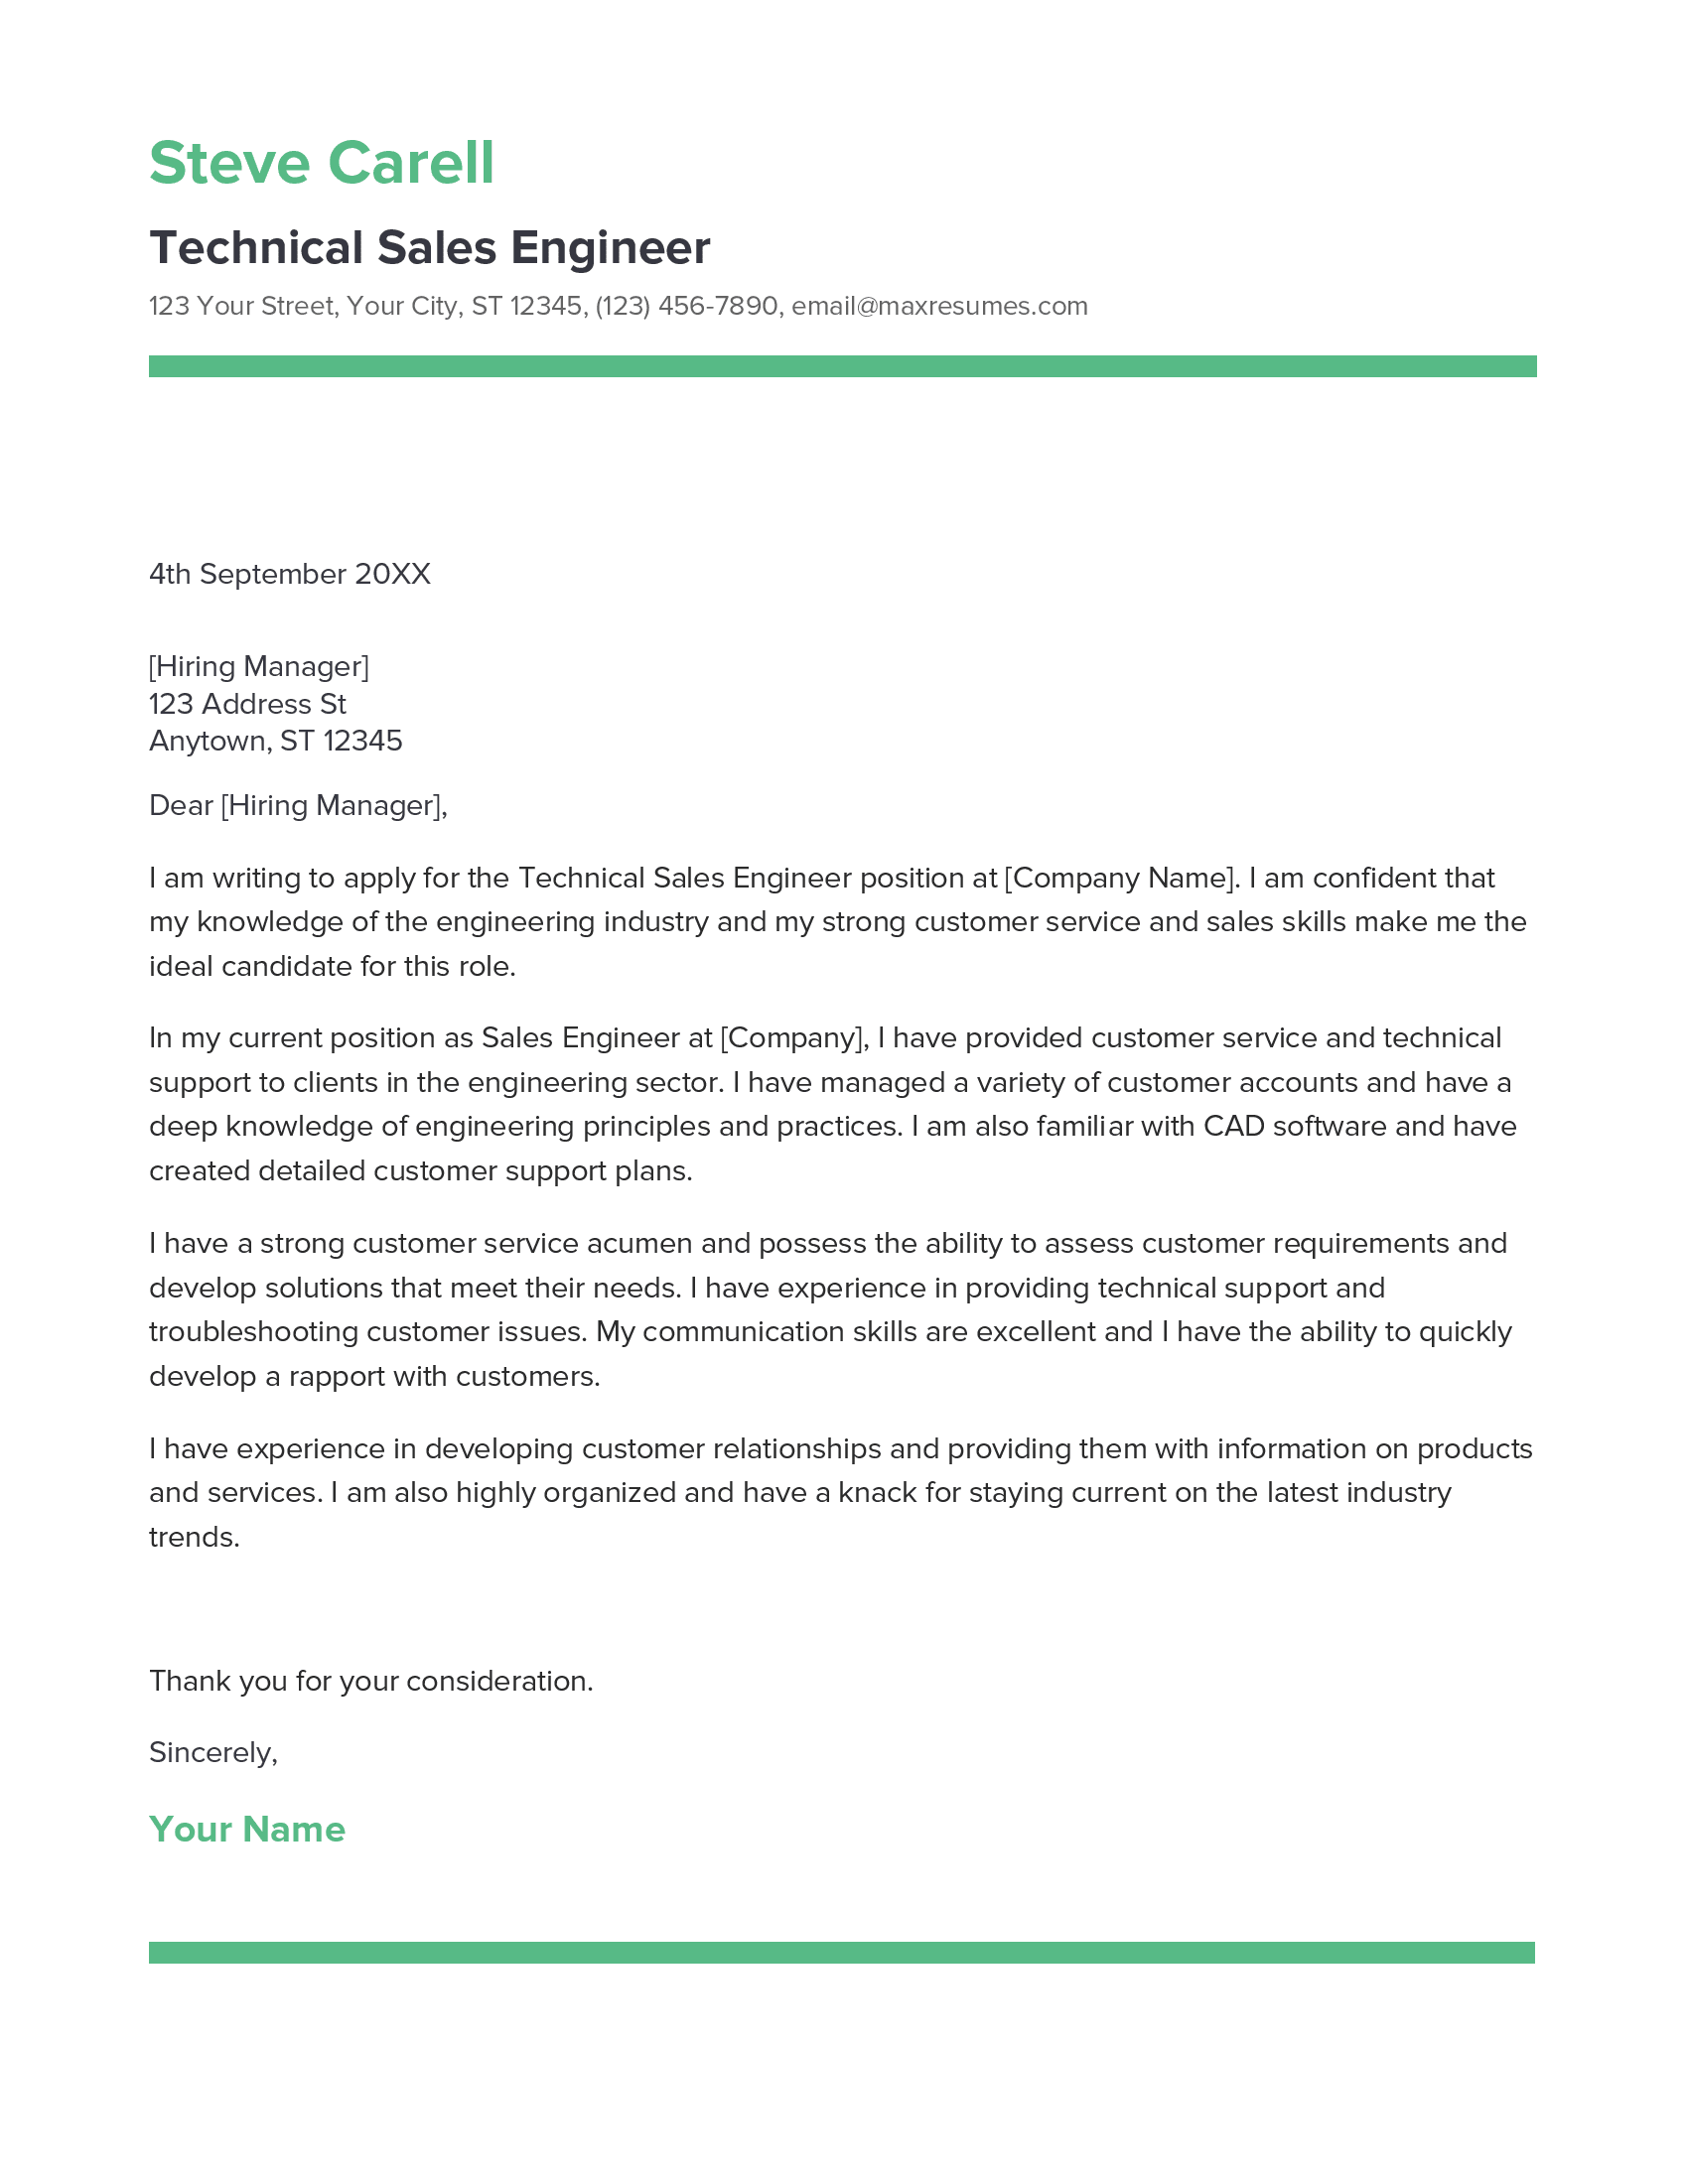 Technical Sales Engineer Cover Letter Example